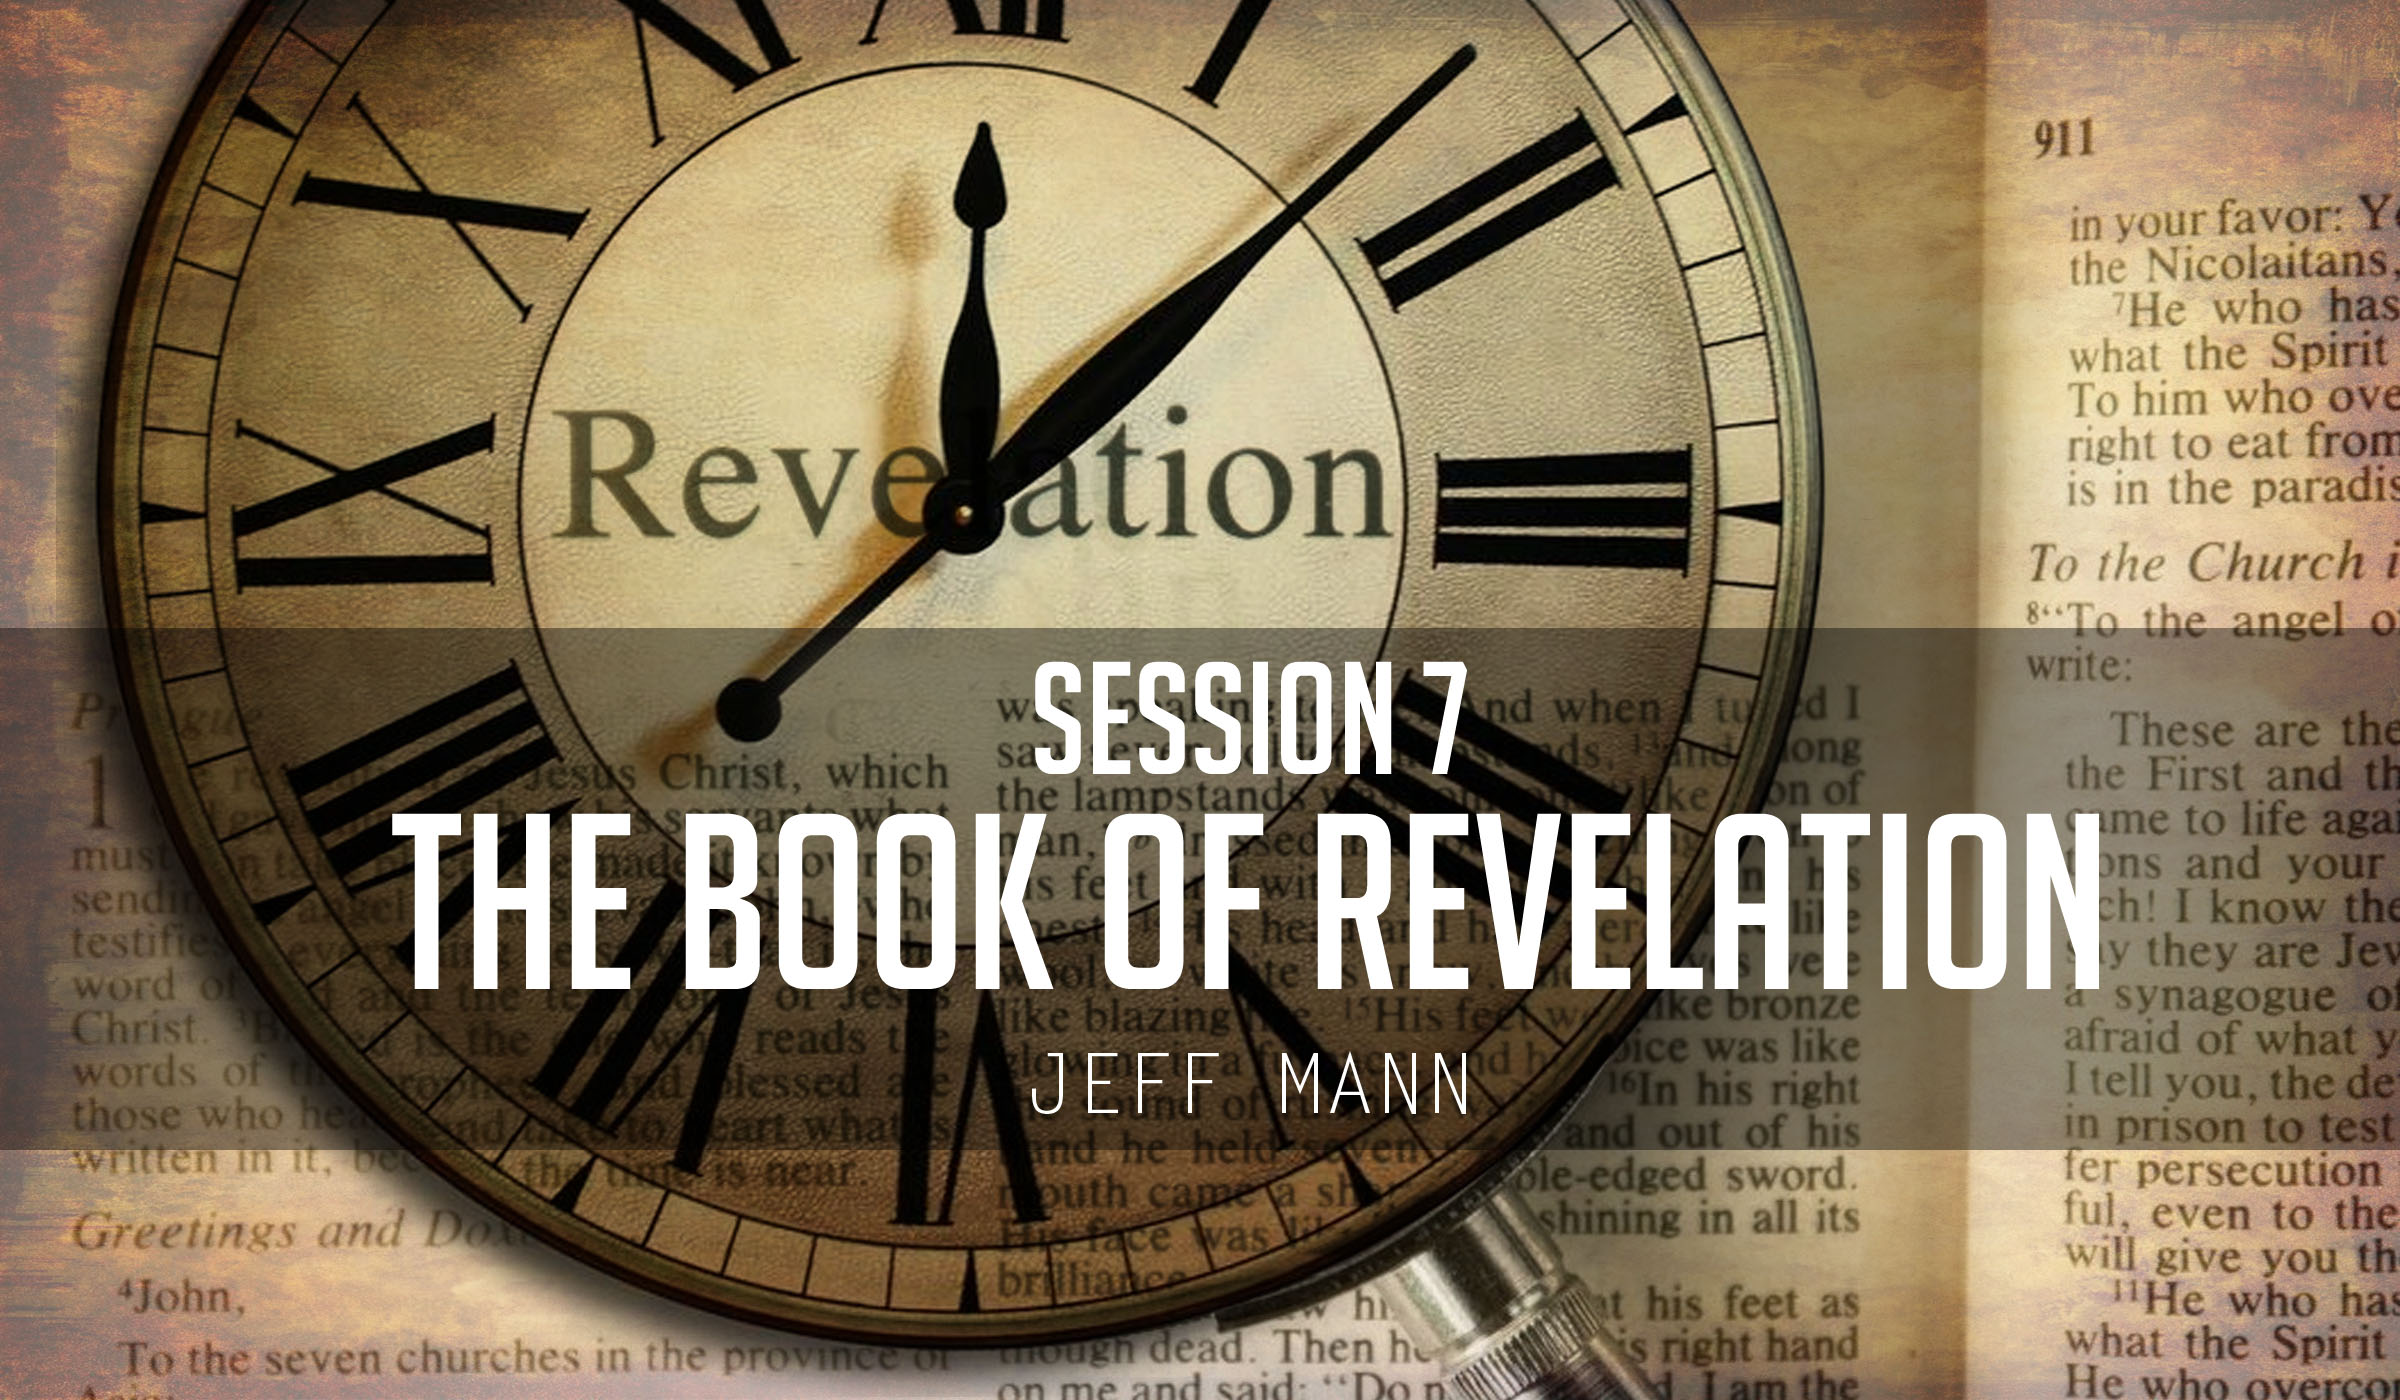 The Book of Revelation Session 7